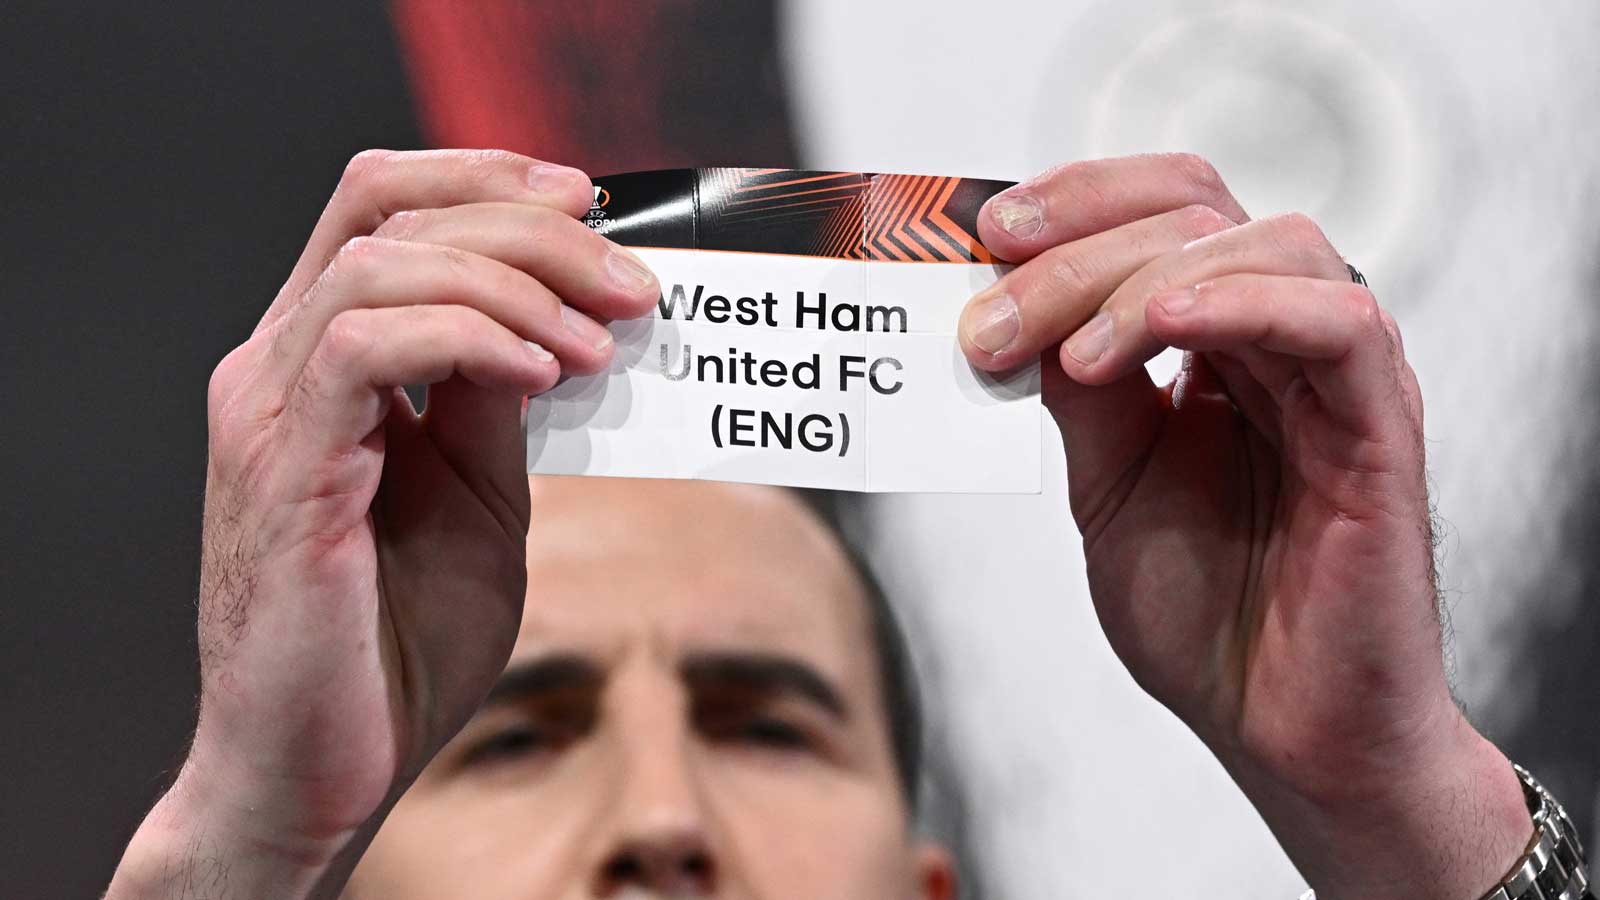 John O'Shea with West Ham United's draw slip at the UEFA Europa League round of 16 draw